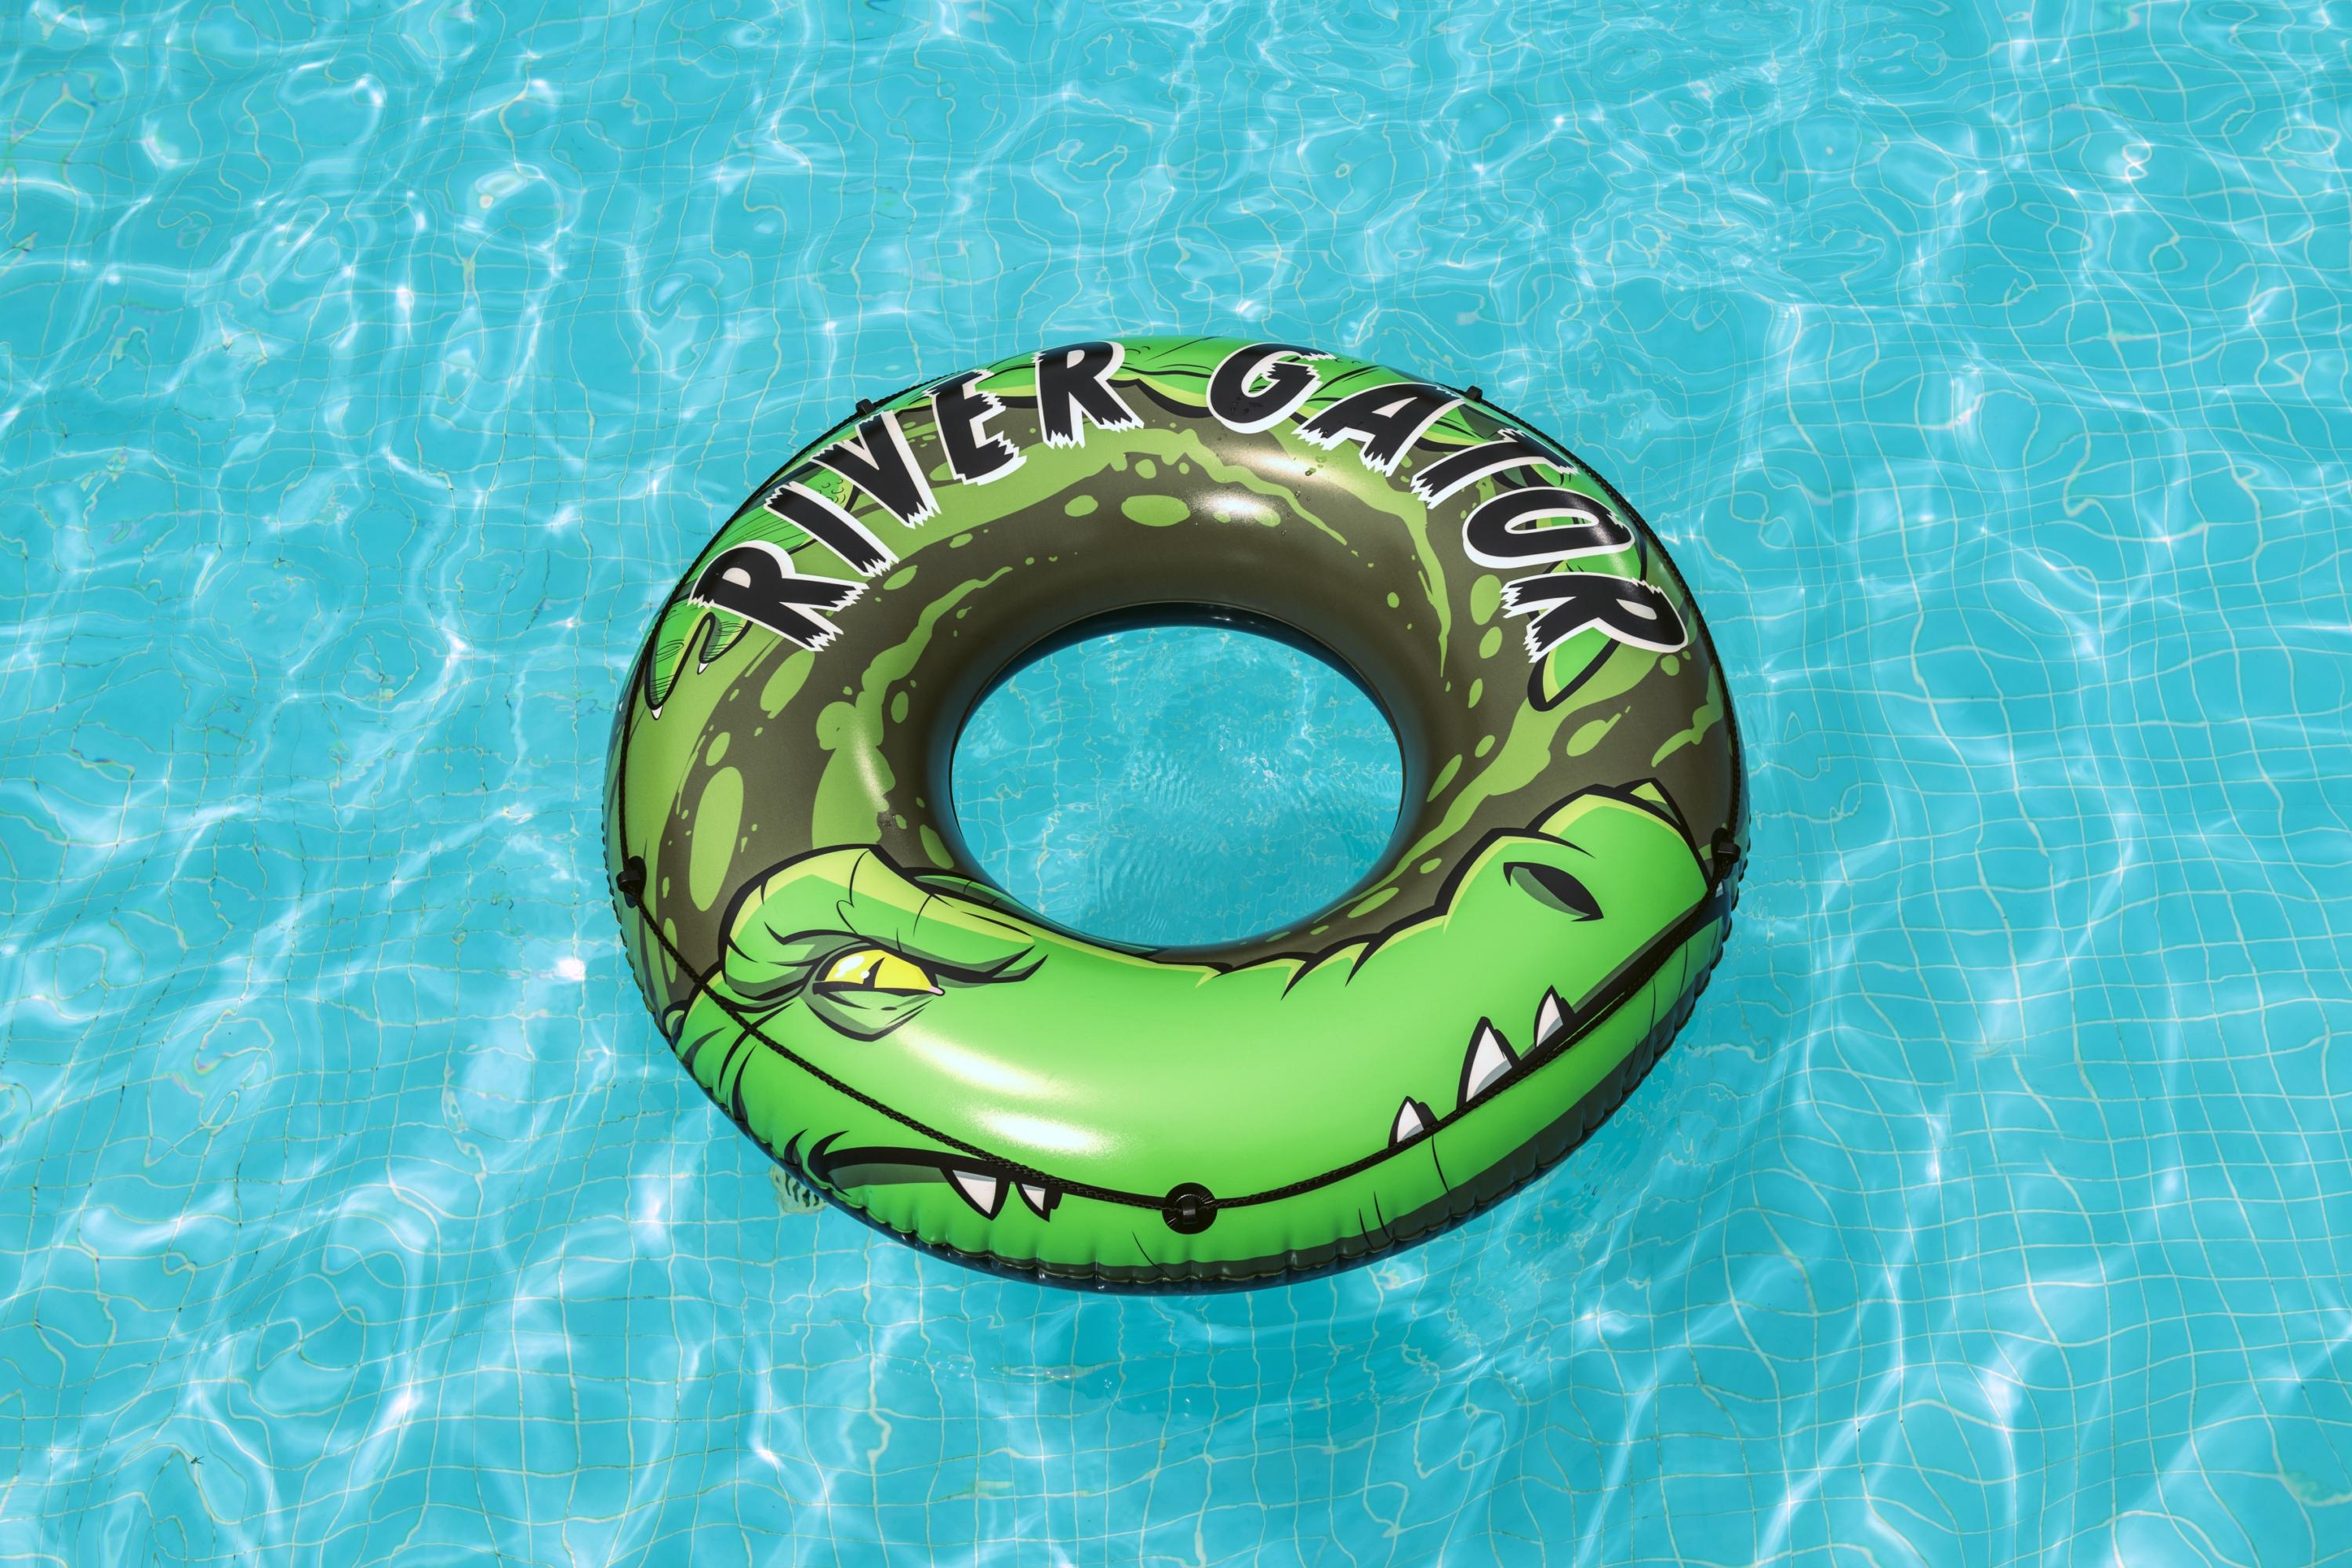 H2OGO! Green River Gator 47" Pool Ring Float with Grab Rope, Adult Unisex - image 7 of 9